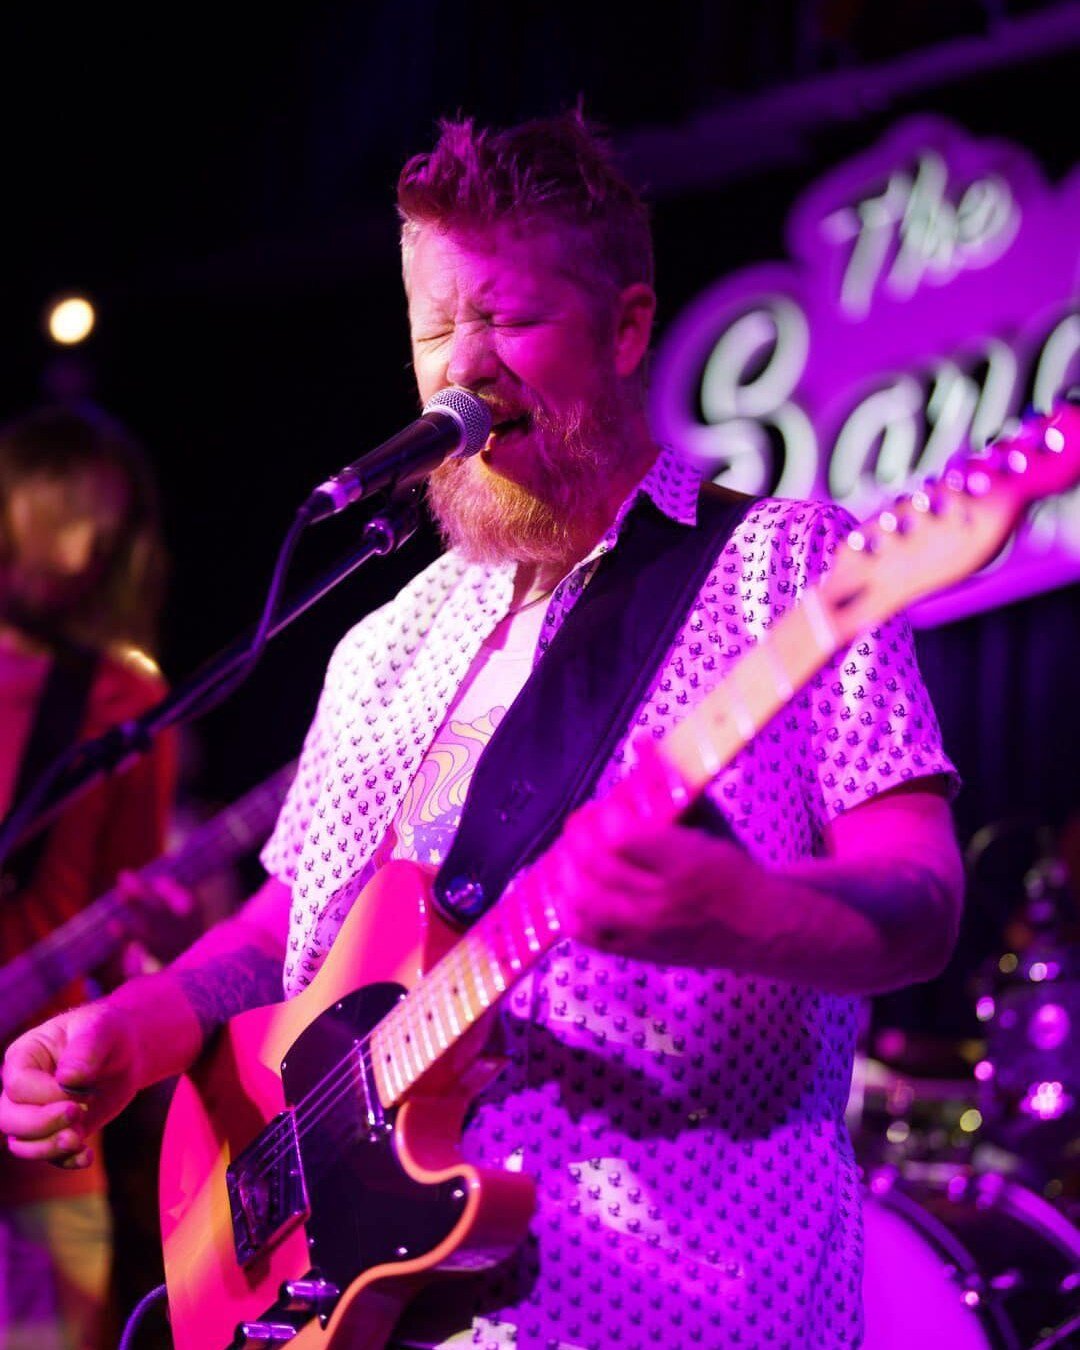 STOKED to be back in Vegas this spring! It's a two-fer with Friday, April 12 at @thesanddollardt and Saturday, April 13 at @thesanddollarlv. You know we love to get down in The Neon City - see you there!

DT photo by @the7dares 
.
.
.
.
.
.
.
.
.
.
.